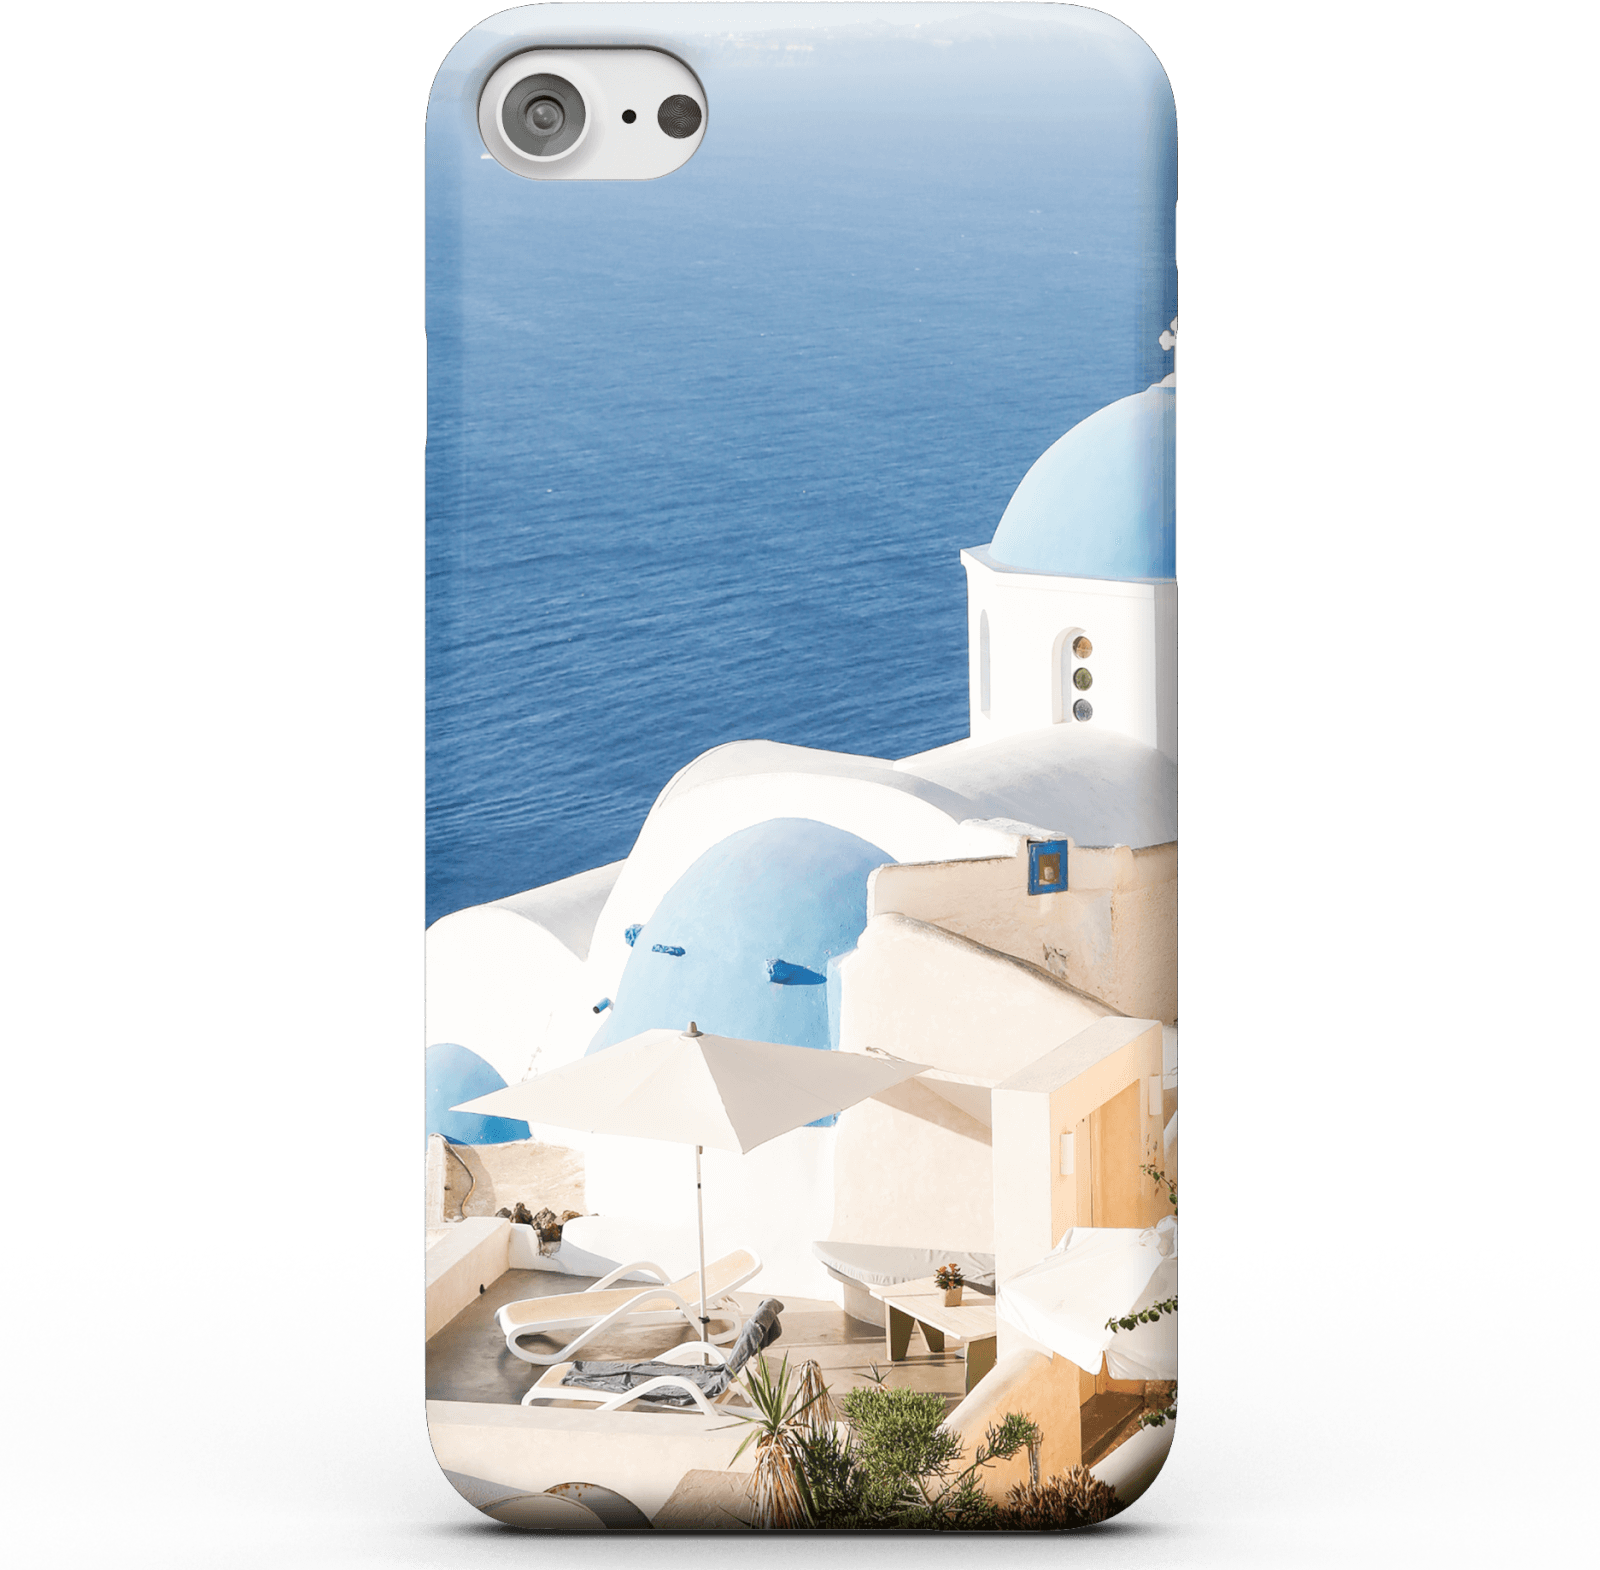 Ocean Views Phone Case for iPhone and Android - iPhone 5/5s - Snap Case - Matte